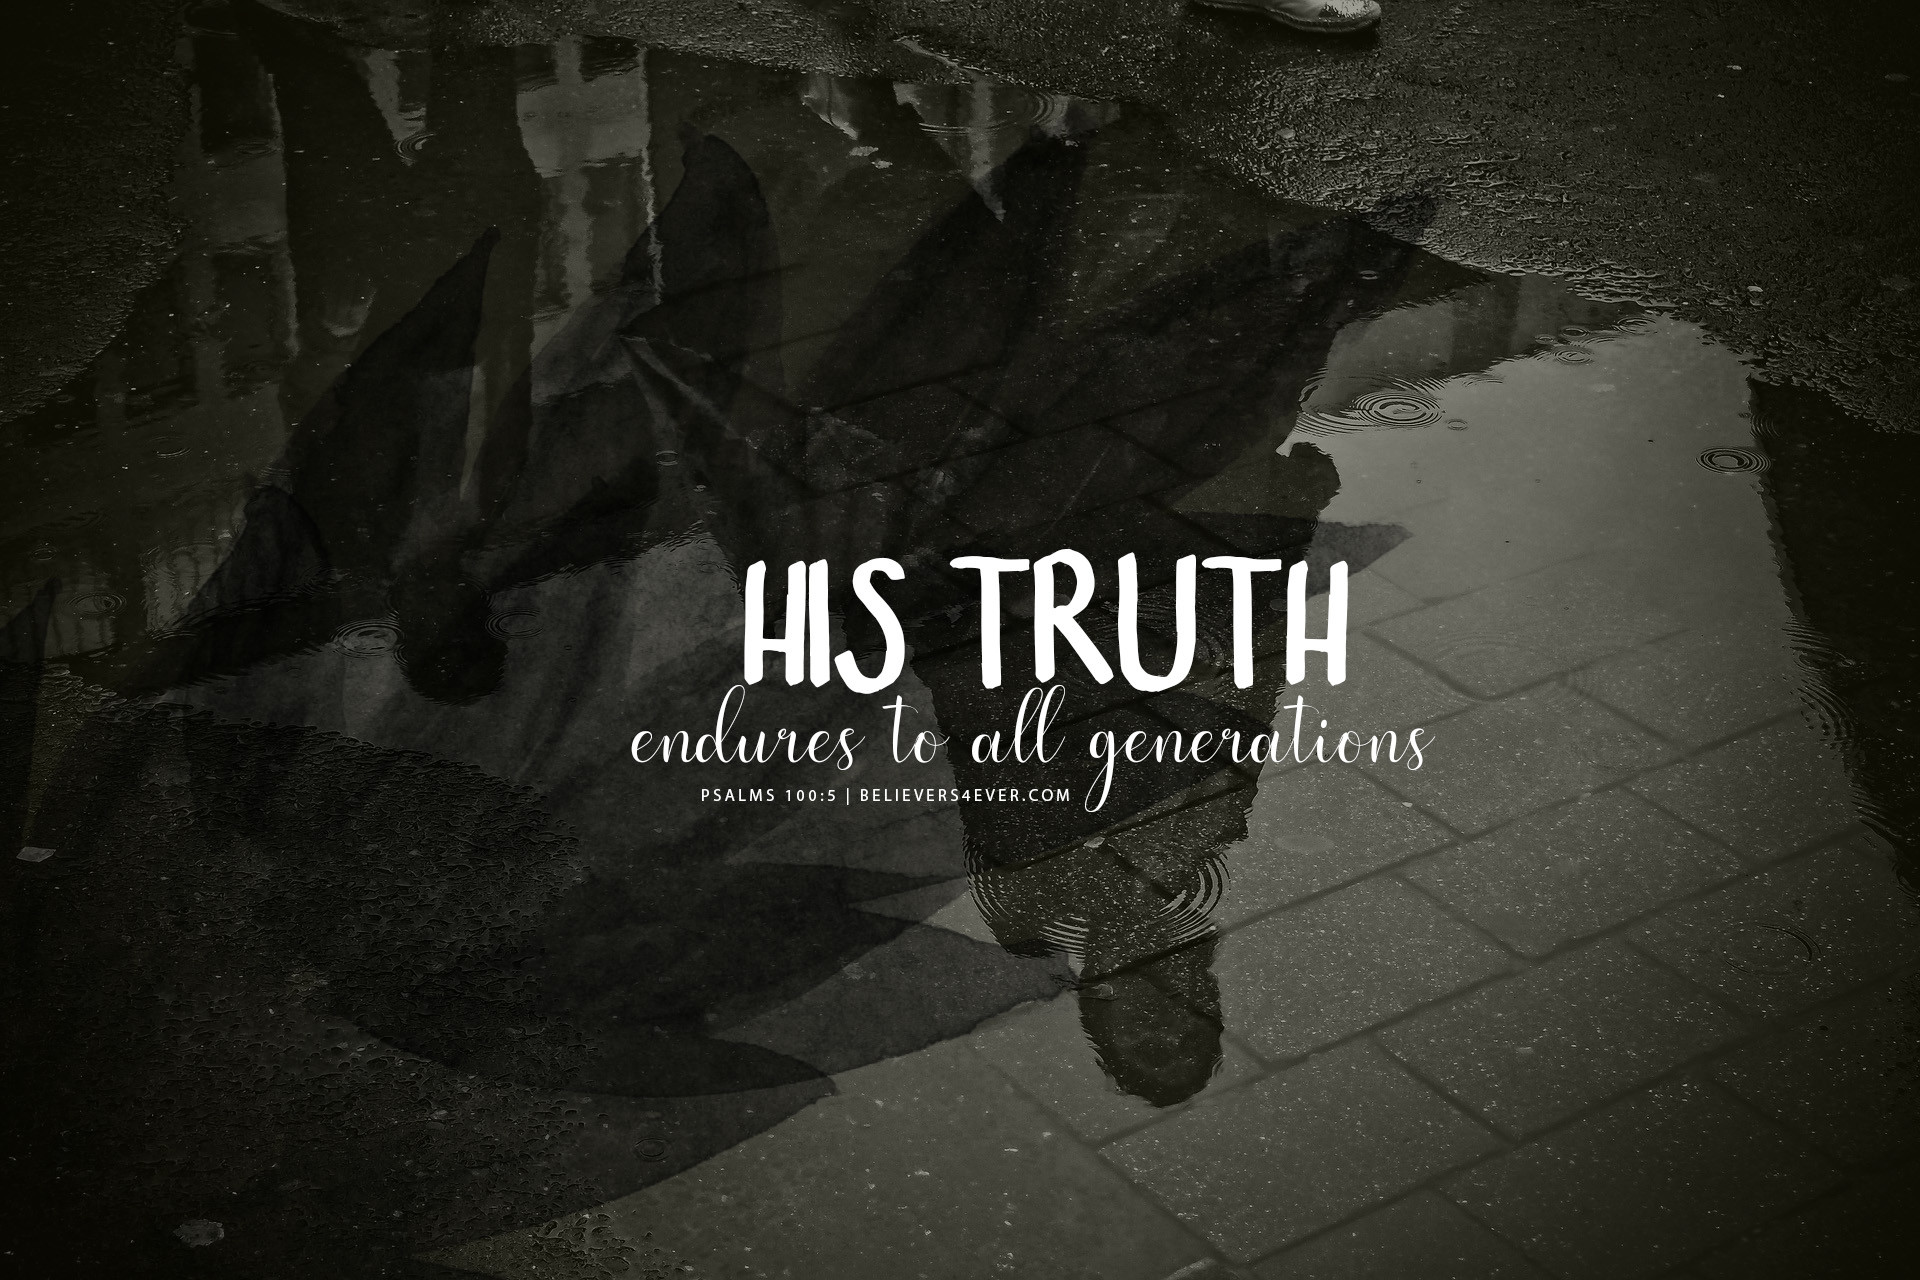 1920x1280 His truth endures to all generations. Download Free #Christian desktop HD  wallpaper and Christian